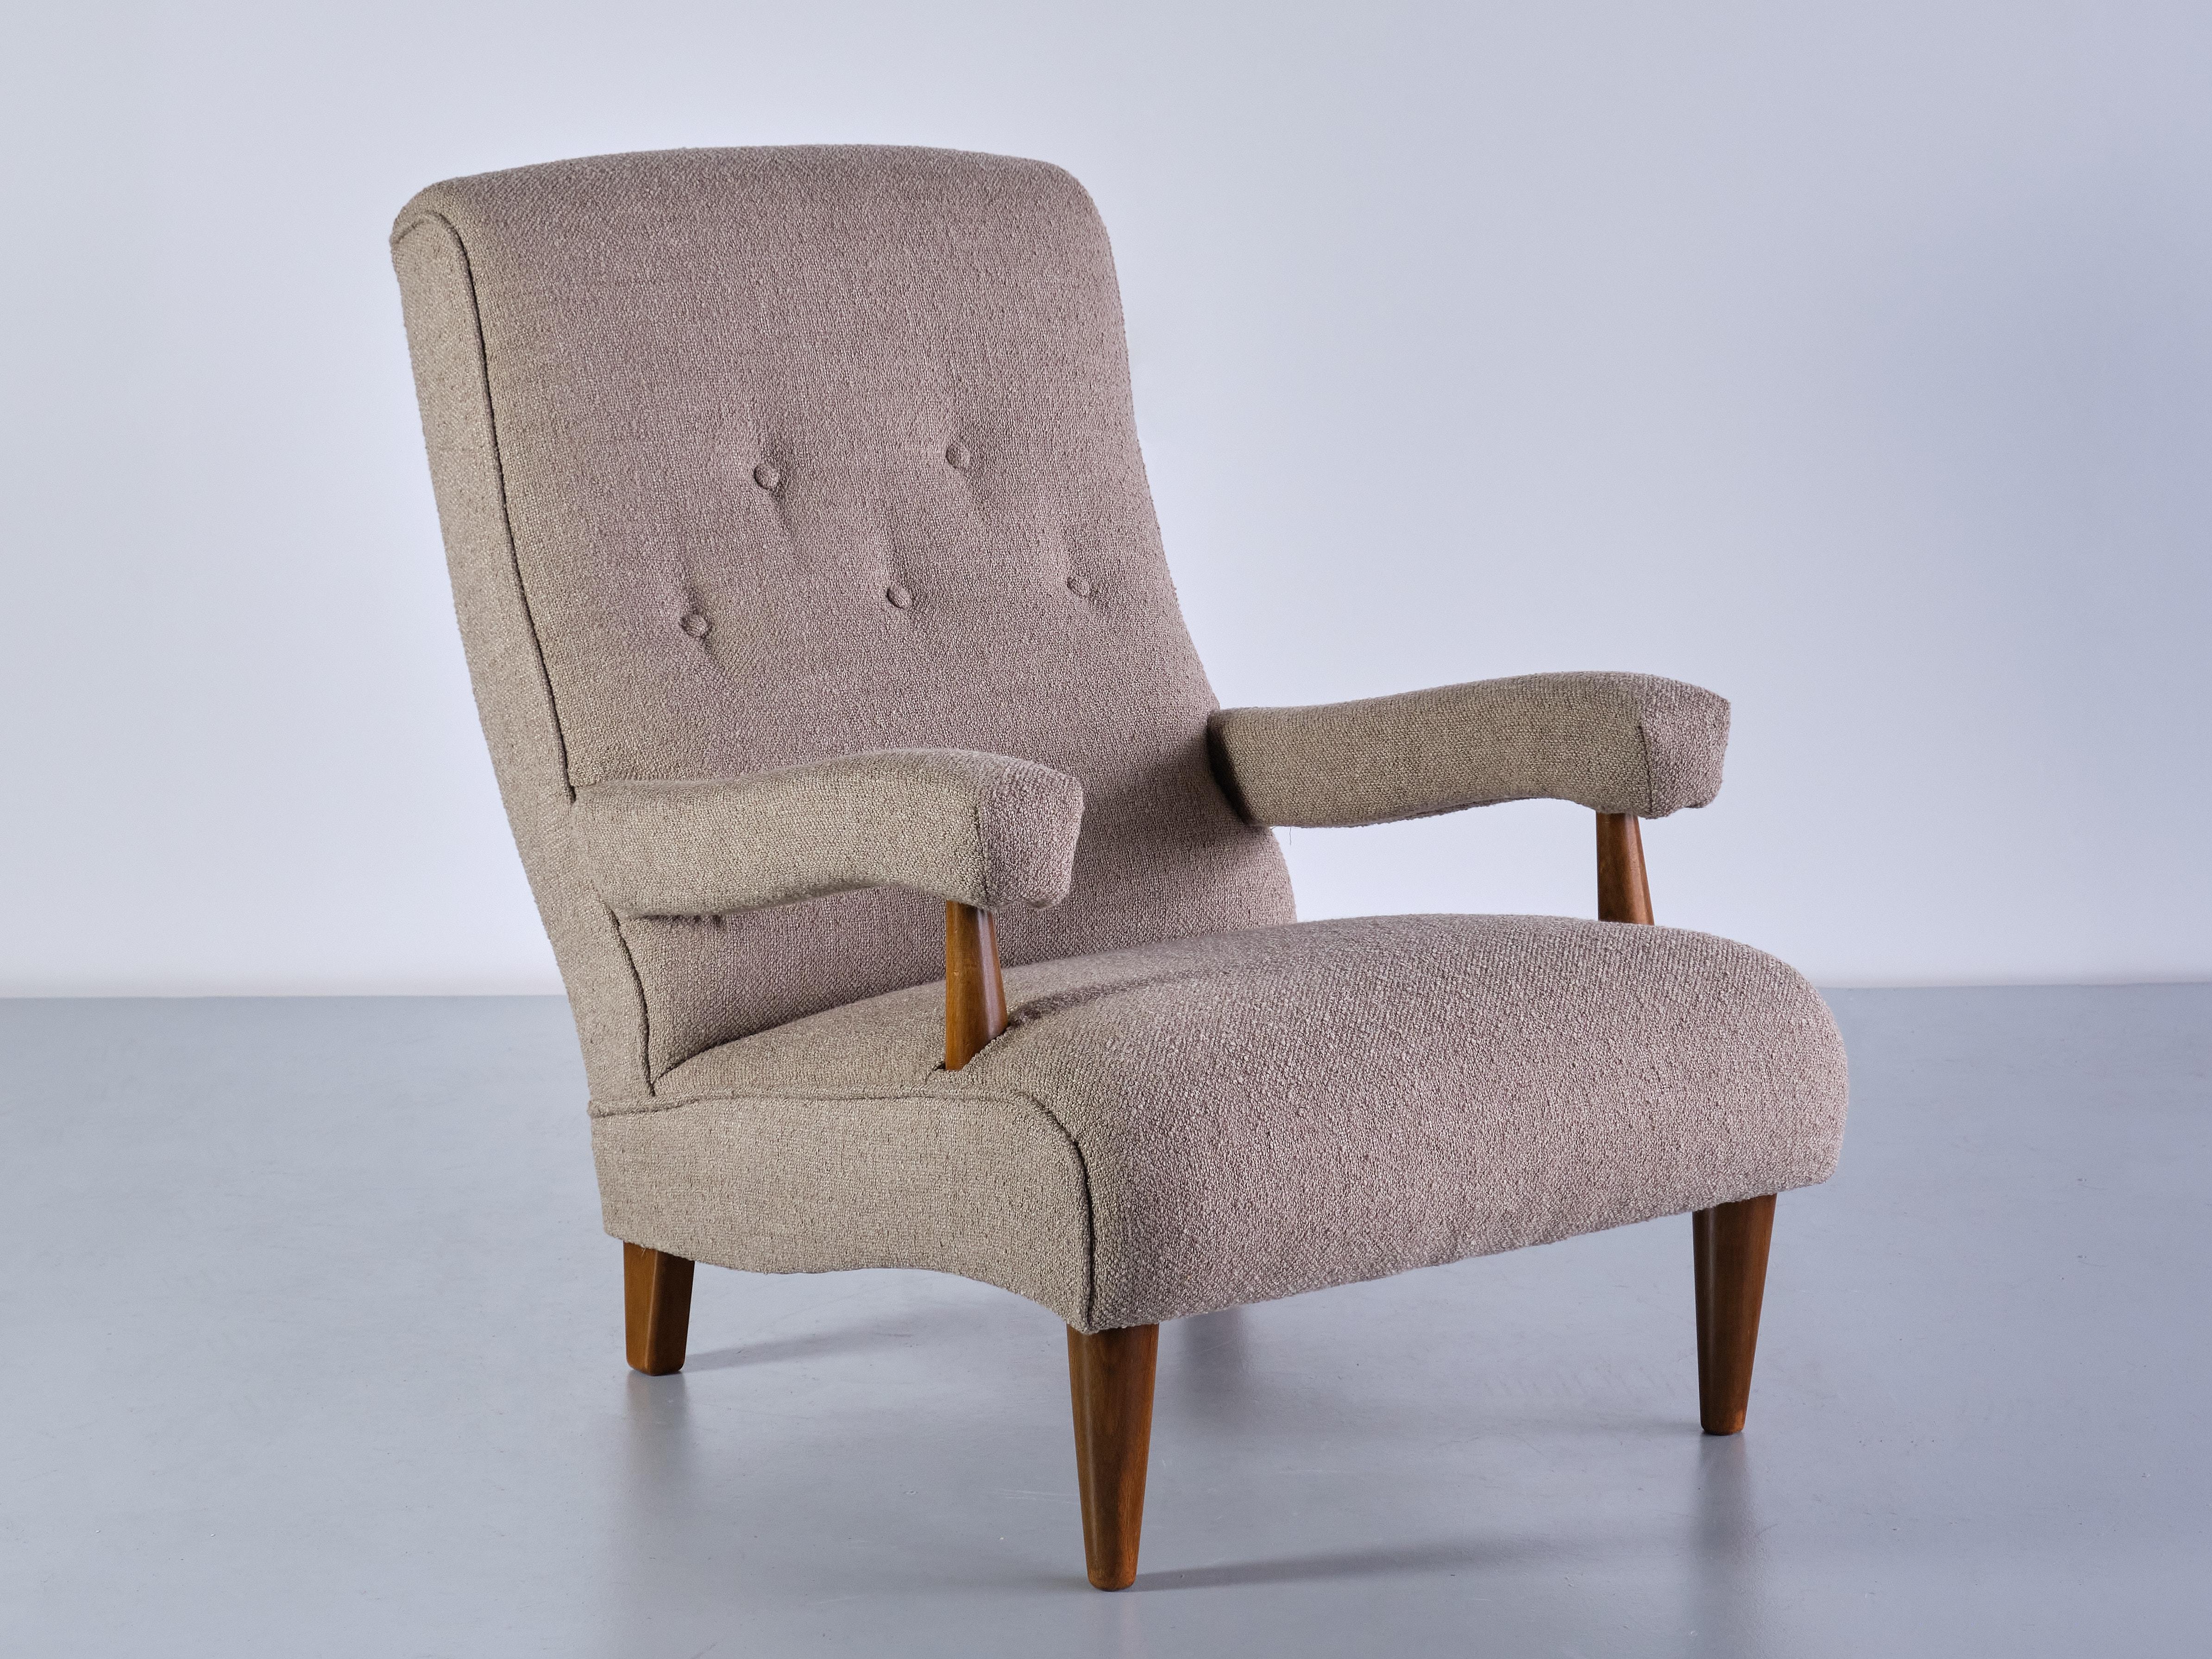 Swedish Tage Westberg Armchair in Bouclé and Beech Wood, Sweden, 1960s For Sale